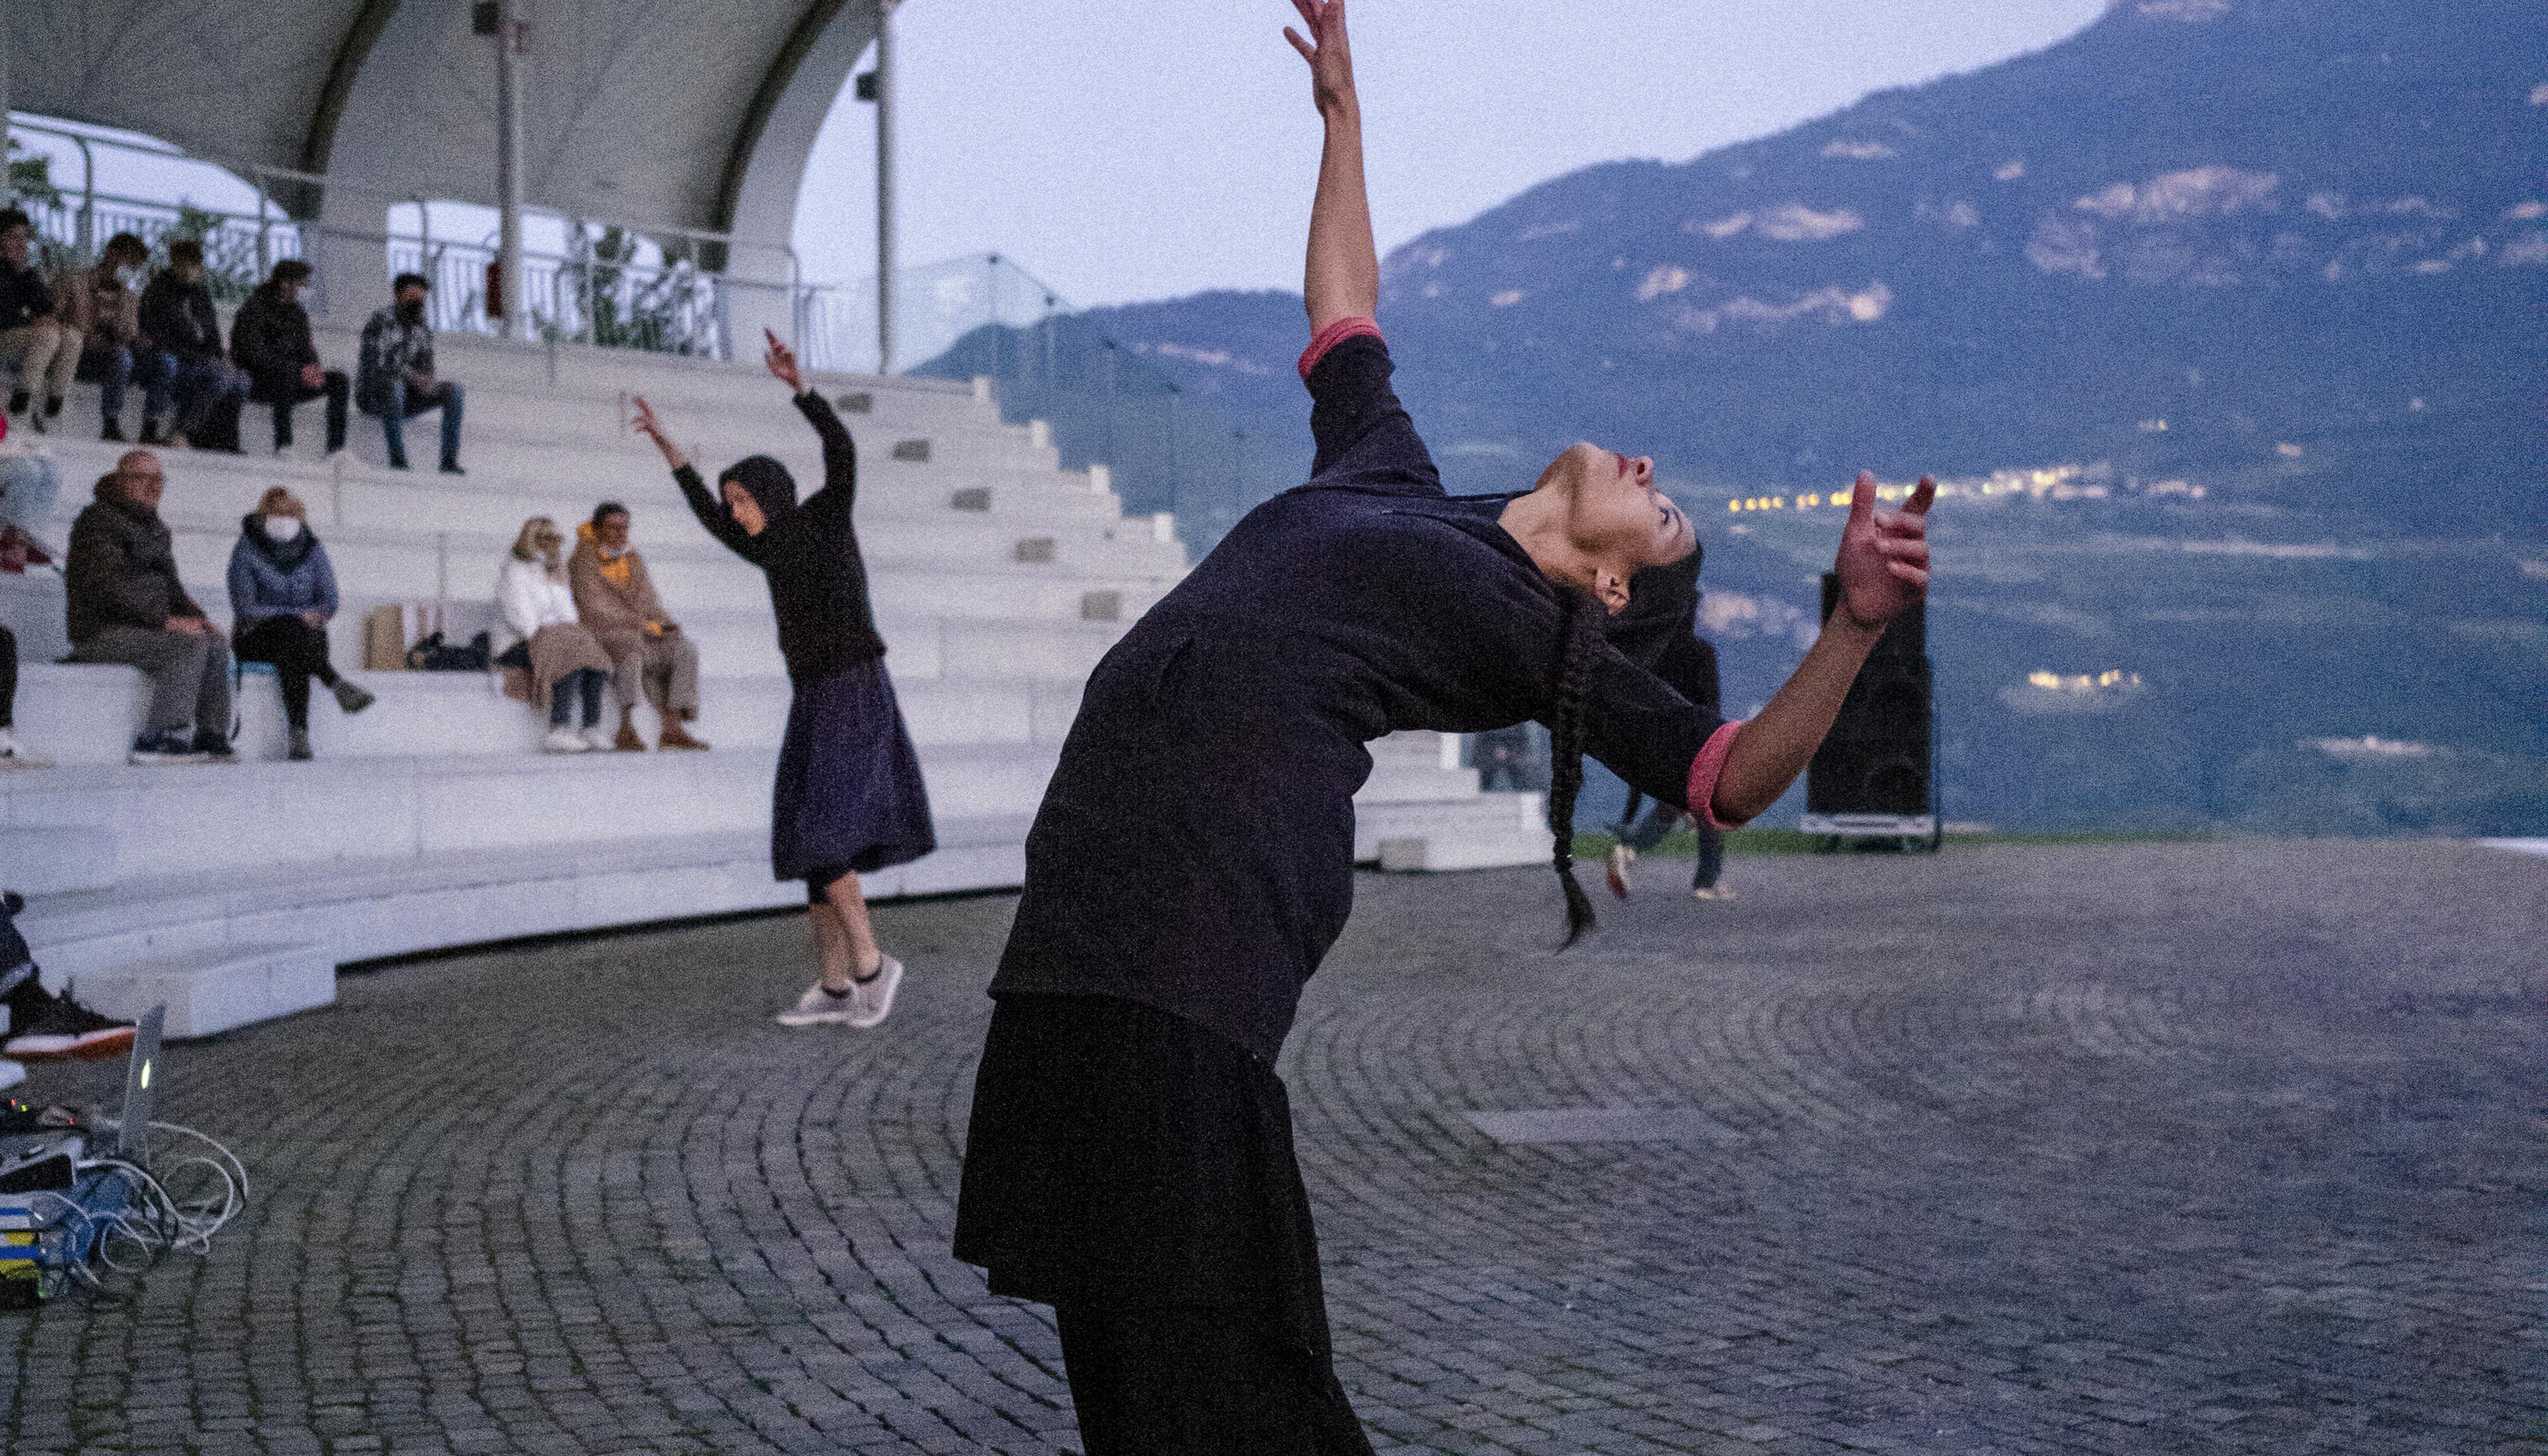 Two dancers during Alessio Romano's performance Choros at the Campana dei Caduti. The dancer in the foreground is in a wide back cambré; arms and body off balance .